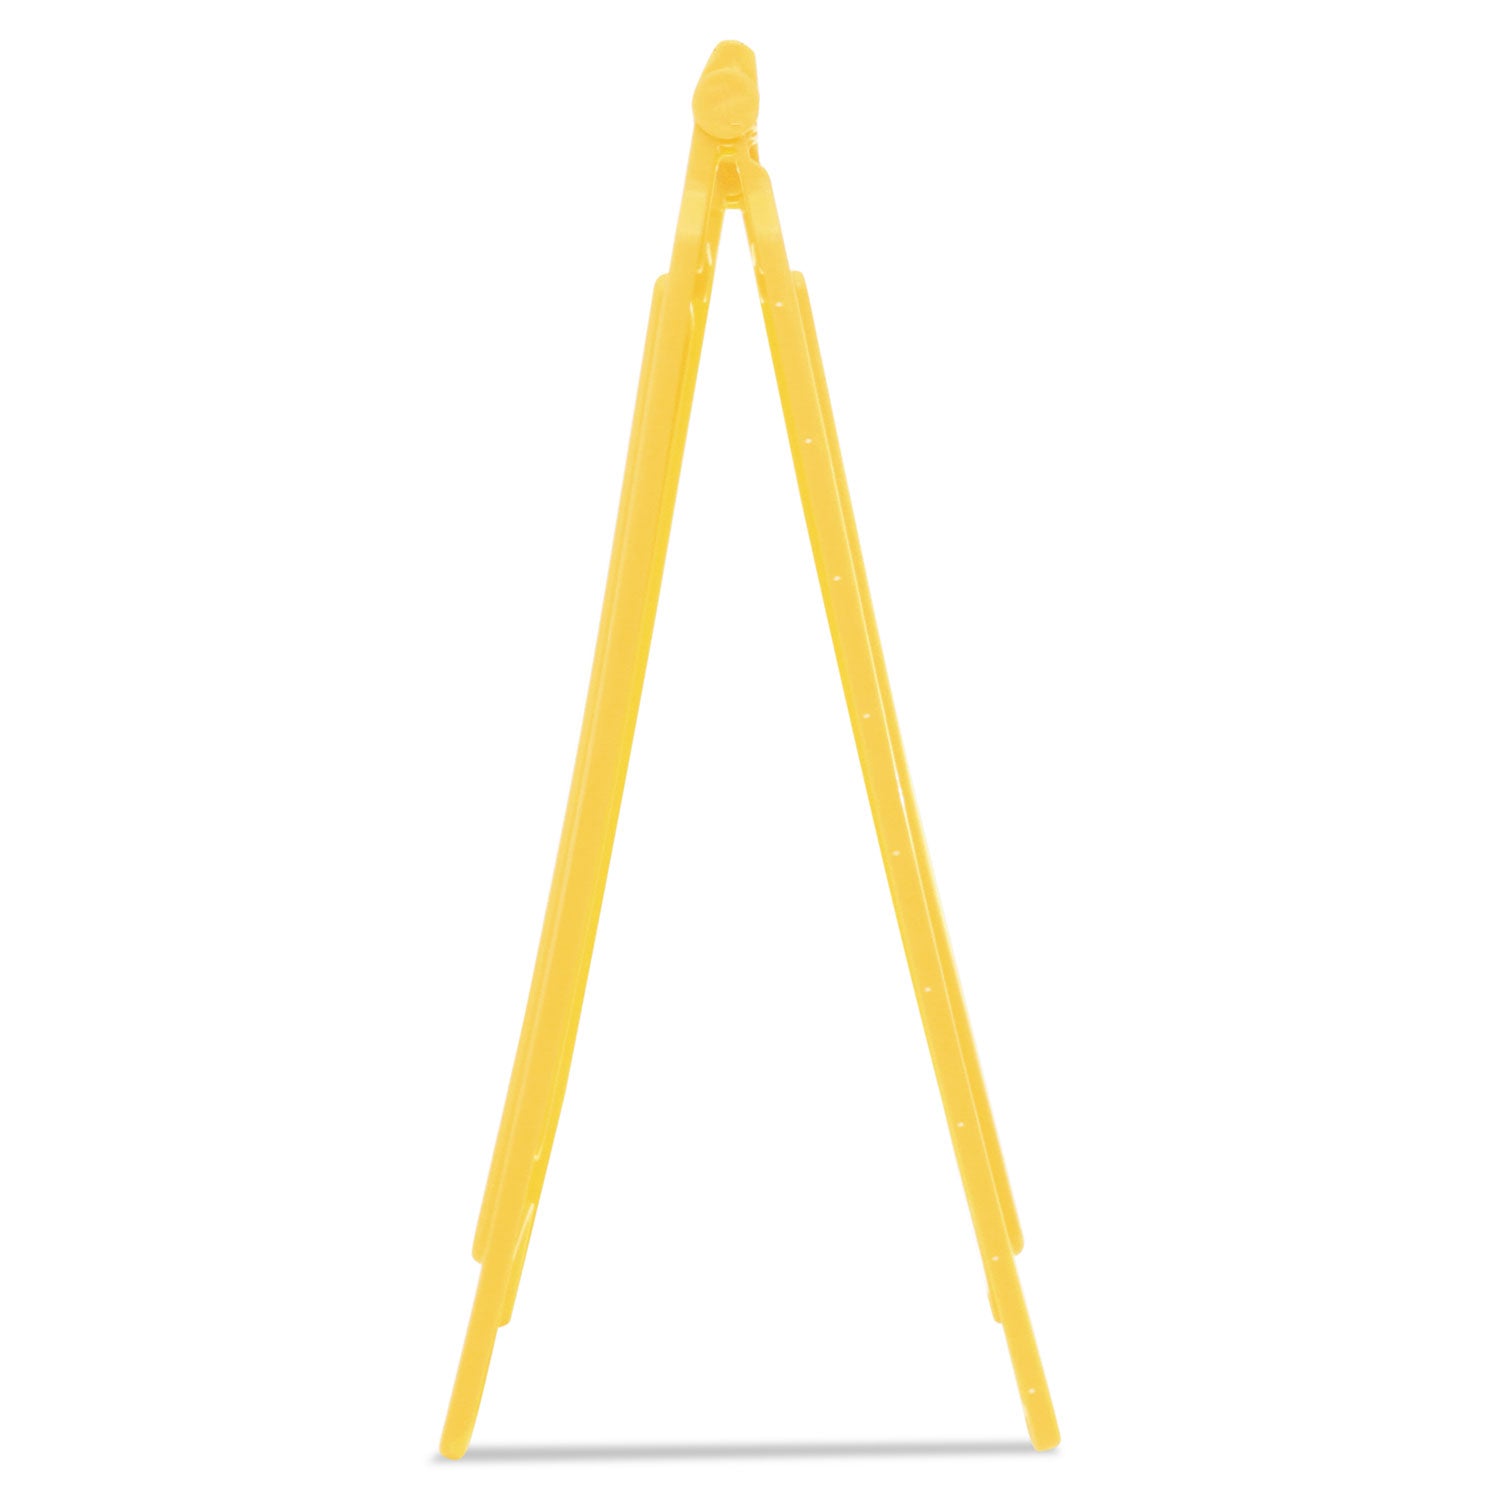 caution-wet-floor-sign-11-x-12-x-25-bright-yellow-6-carton_rcp611277ywct - 2